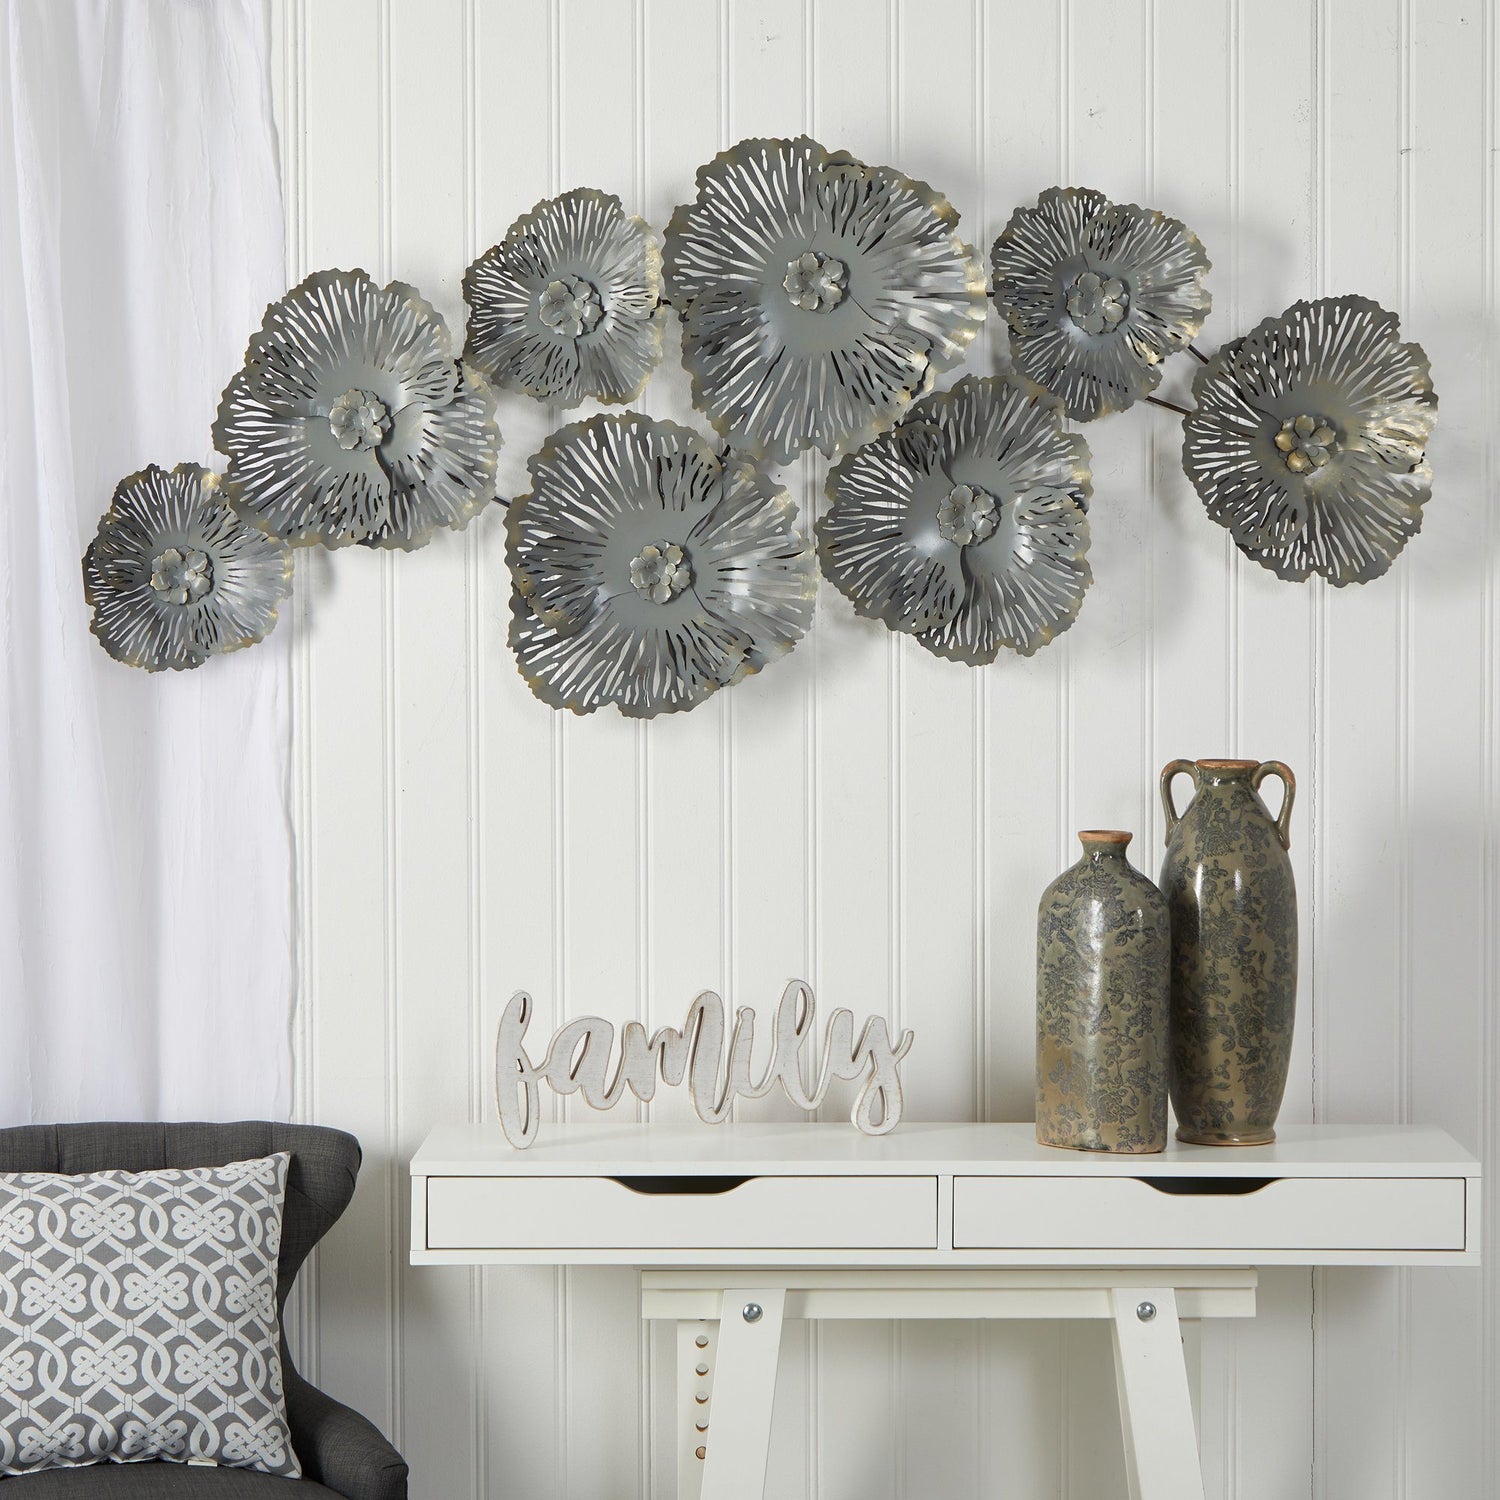 5’ x 2’ Floating Metal Floral Wall Art Decor